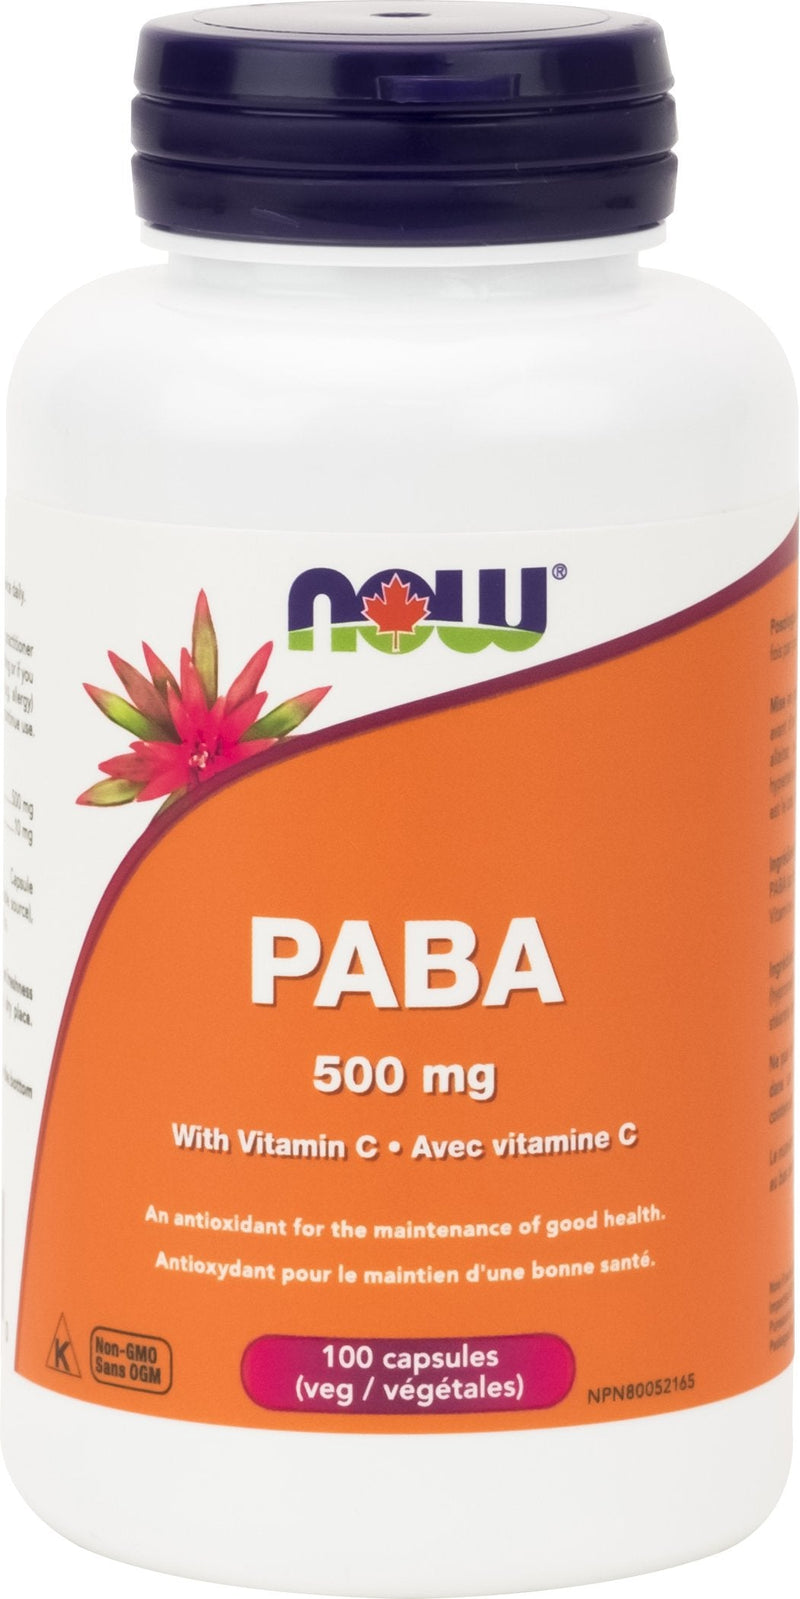 NOW PABA 500 mg with Vitamin C 100 VCaps Image 1